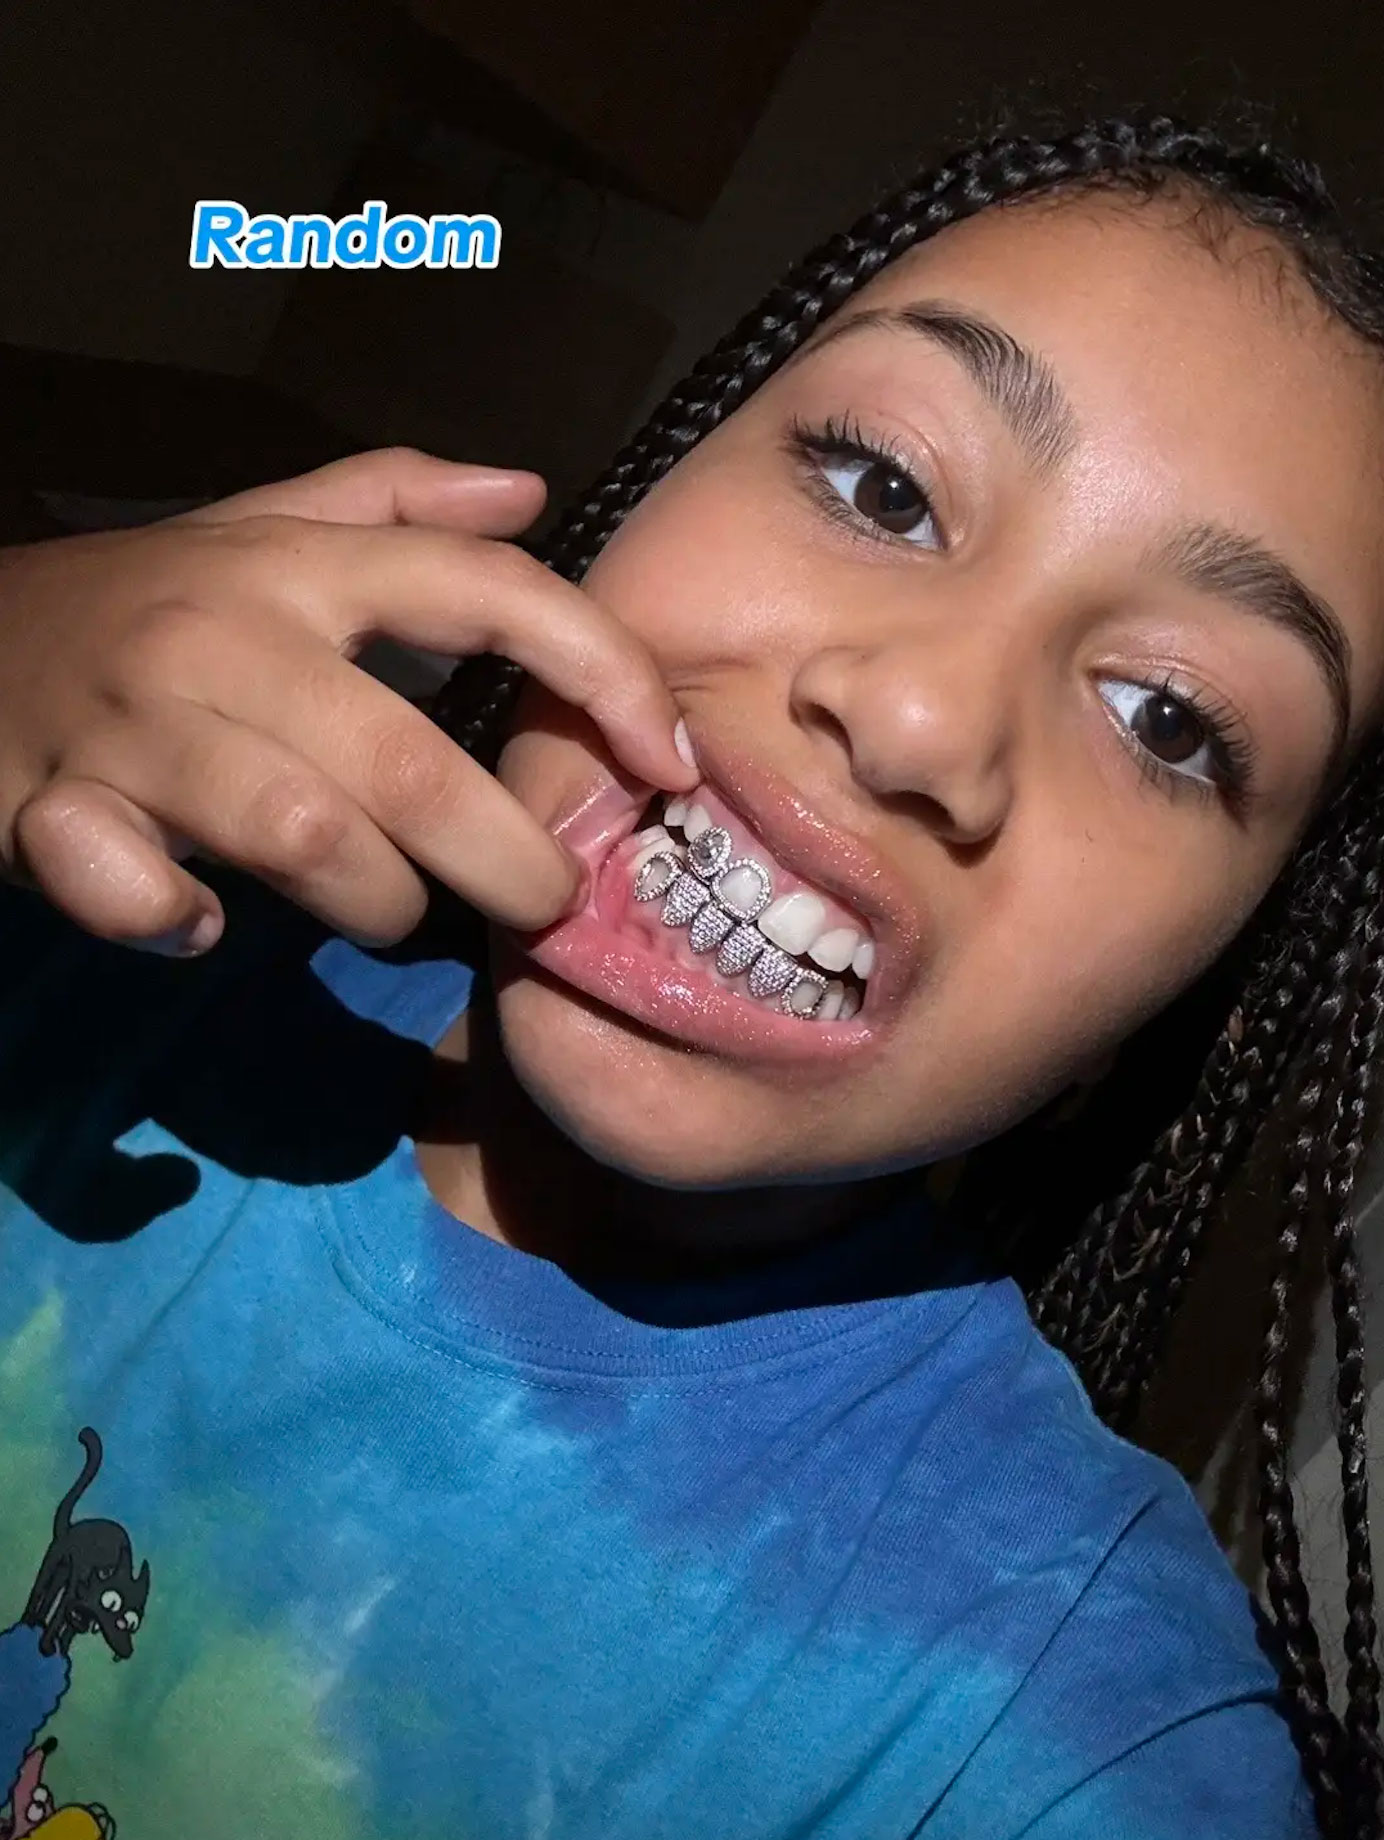 North got diamond grills at the same time as her dad